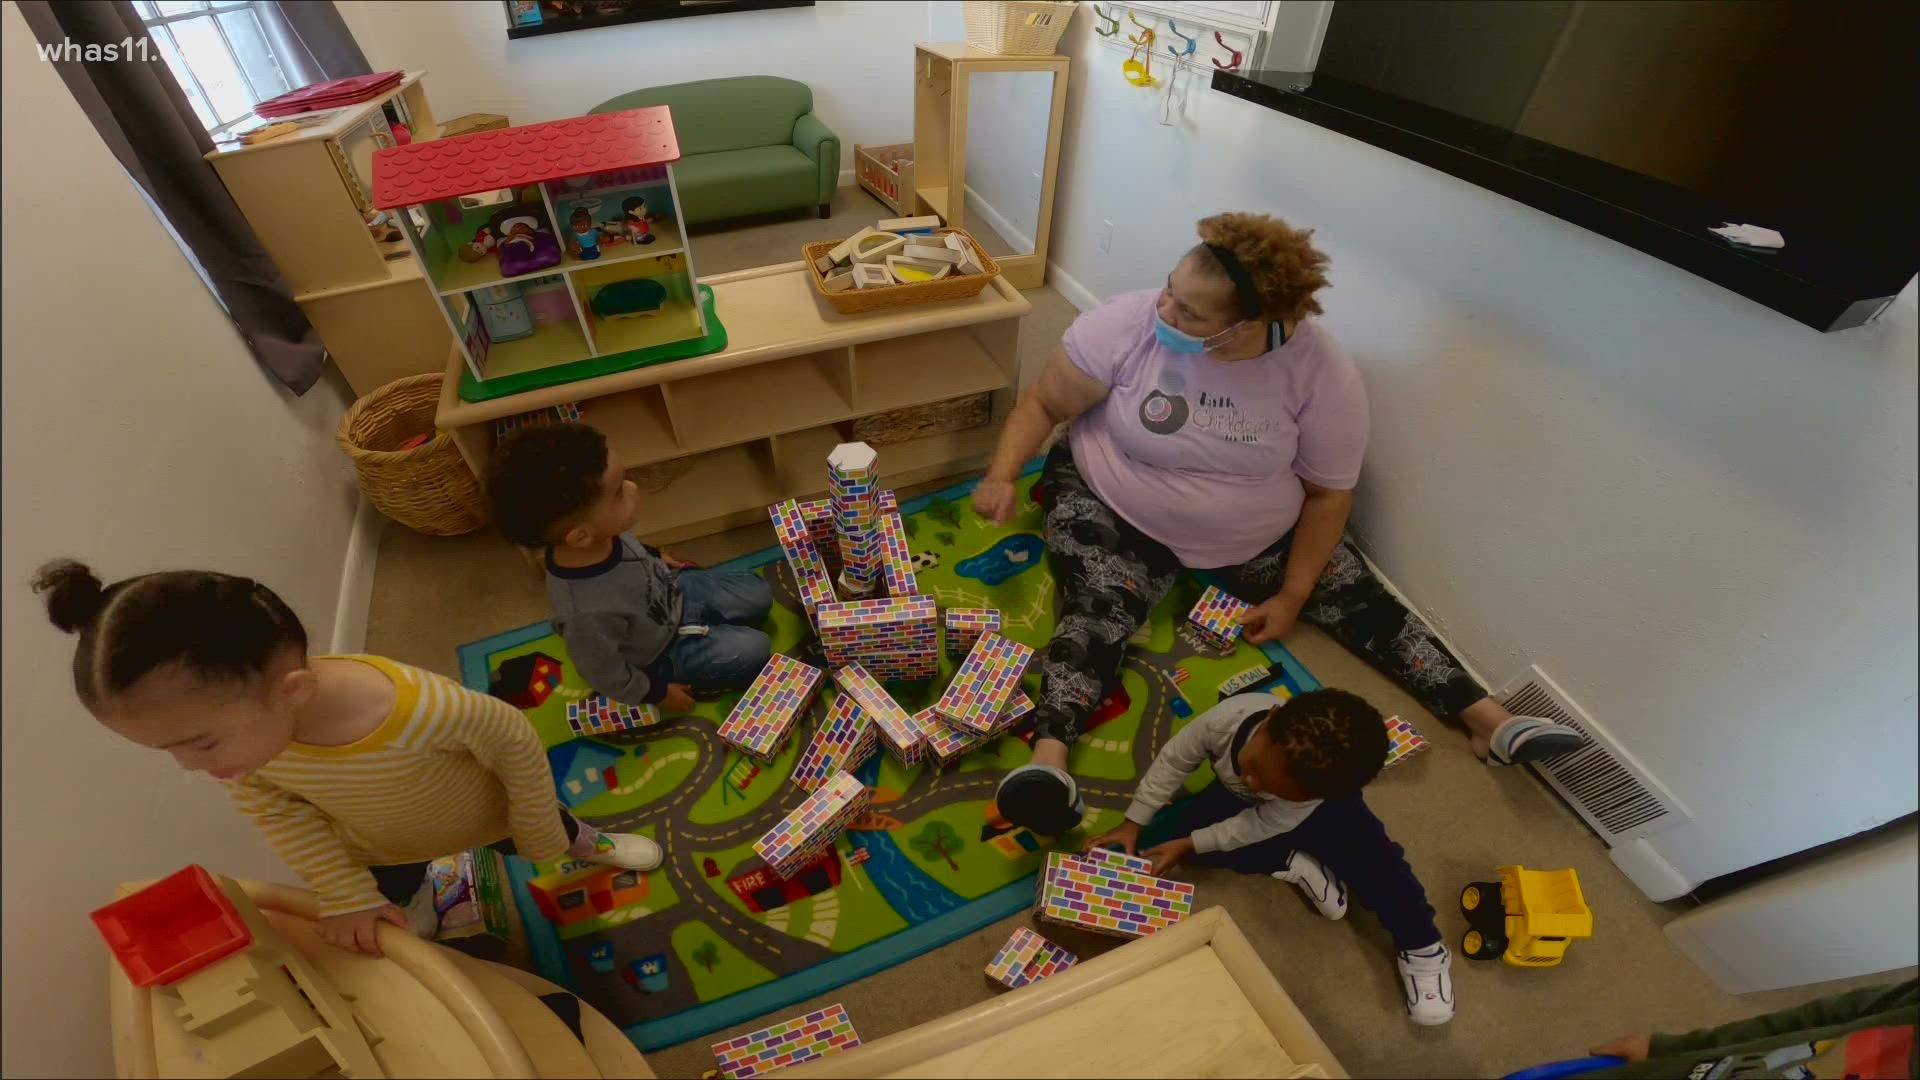 It's a problem parents face -- finding child care. The FOCUS team visits a center in Newburg to show how where you live may determine your access to child care.